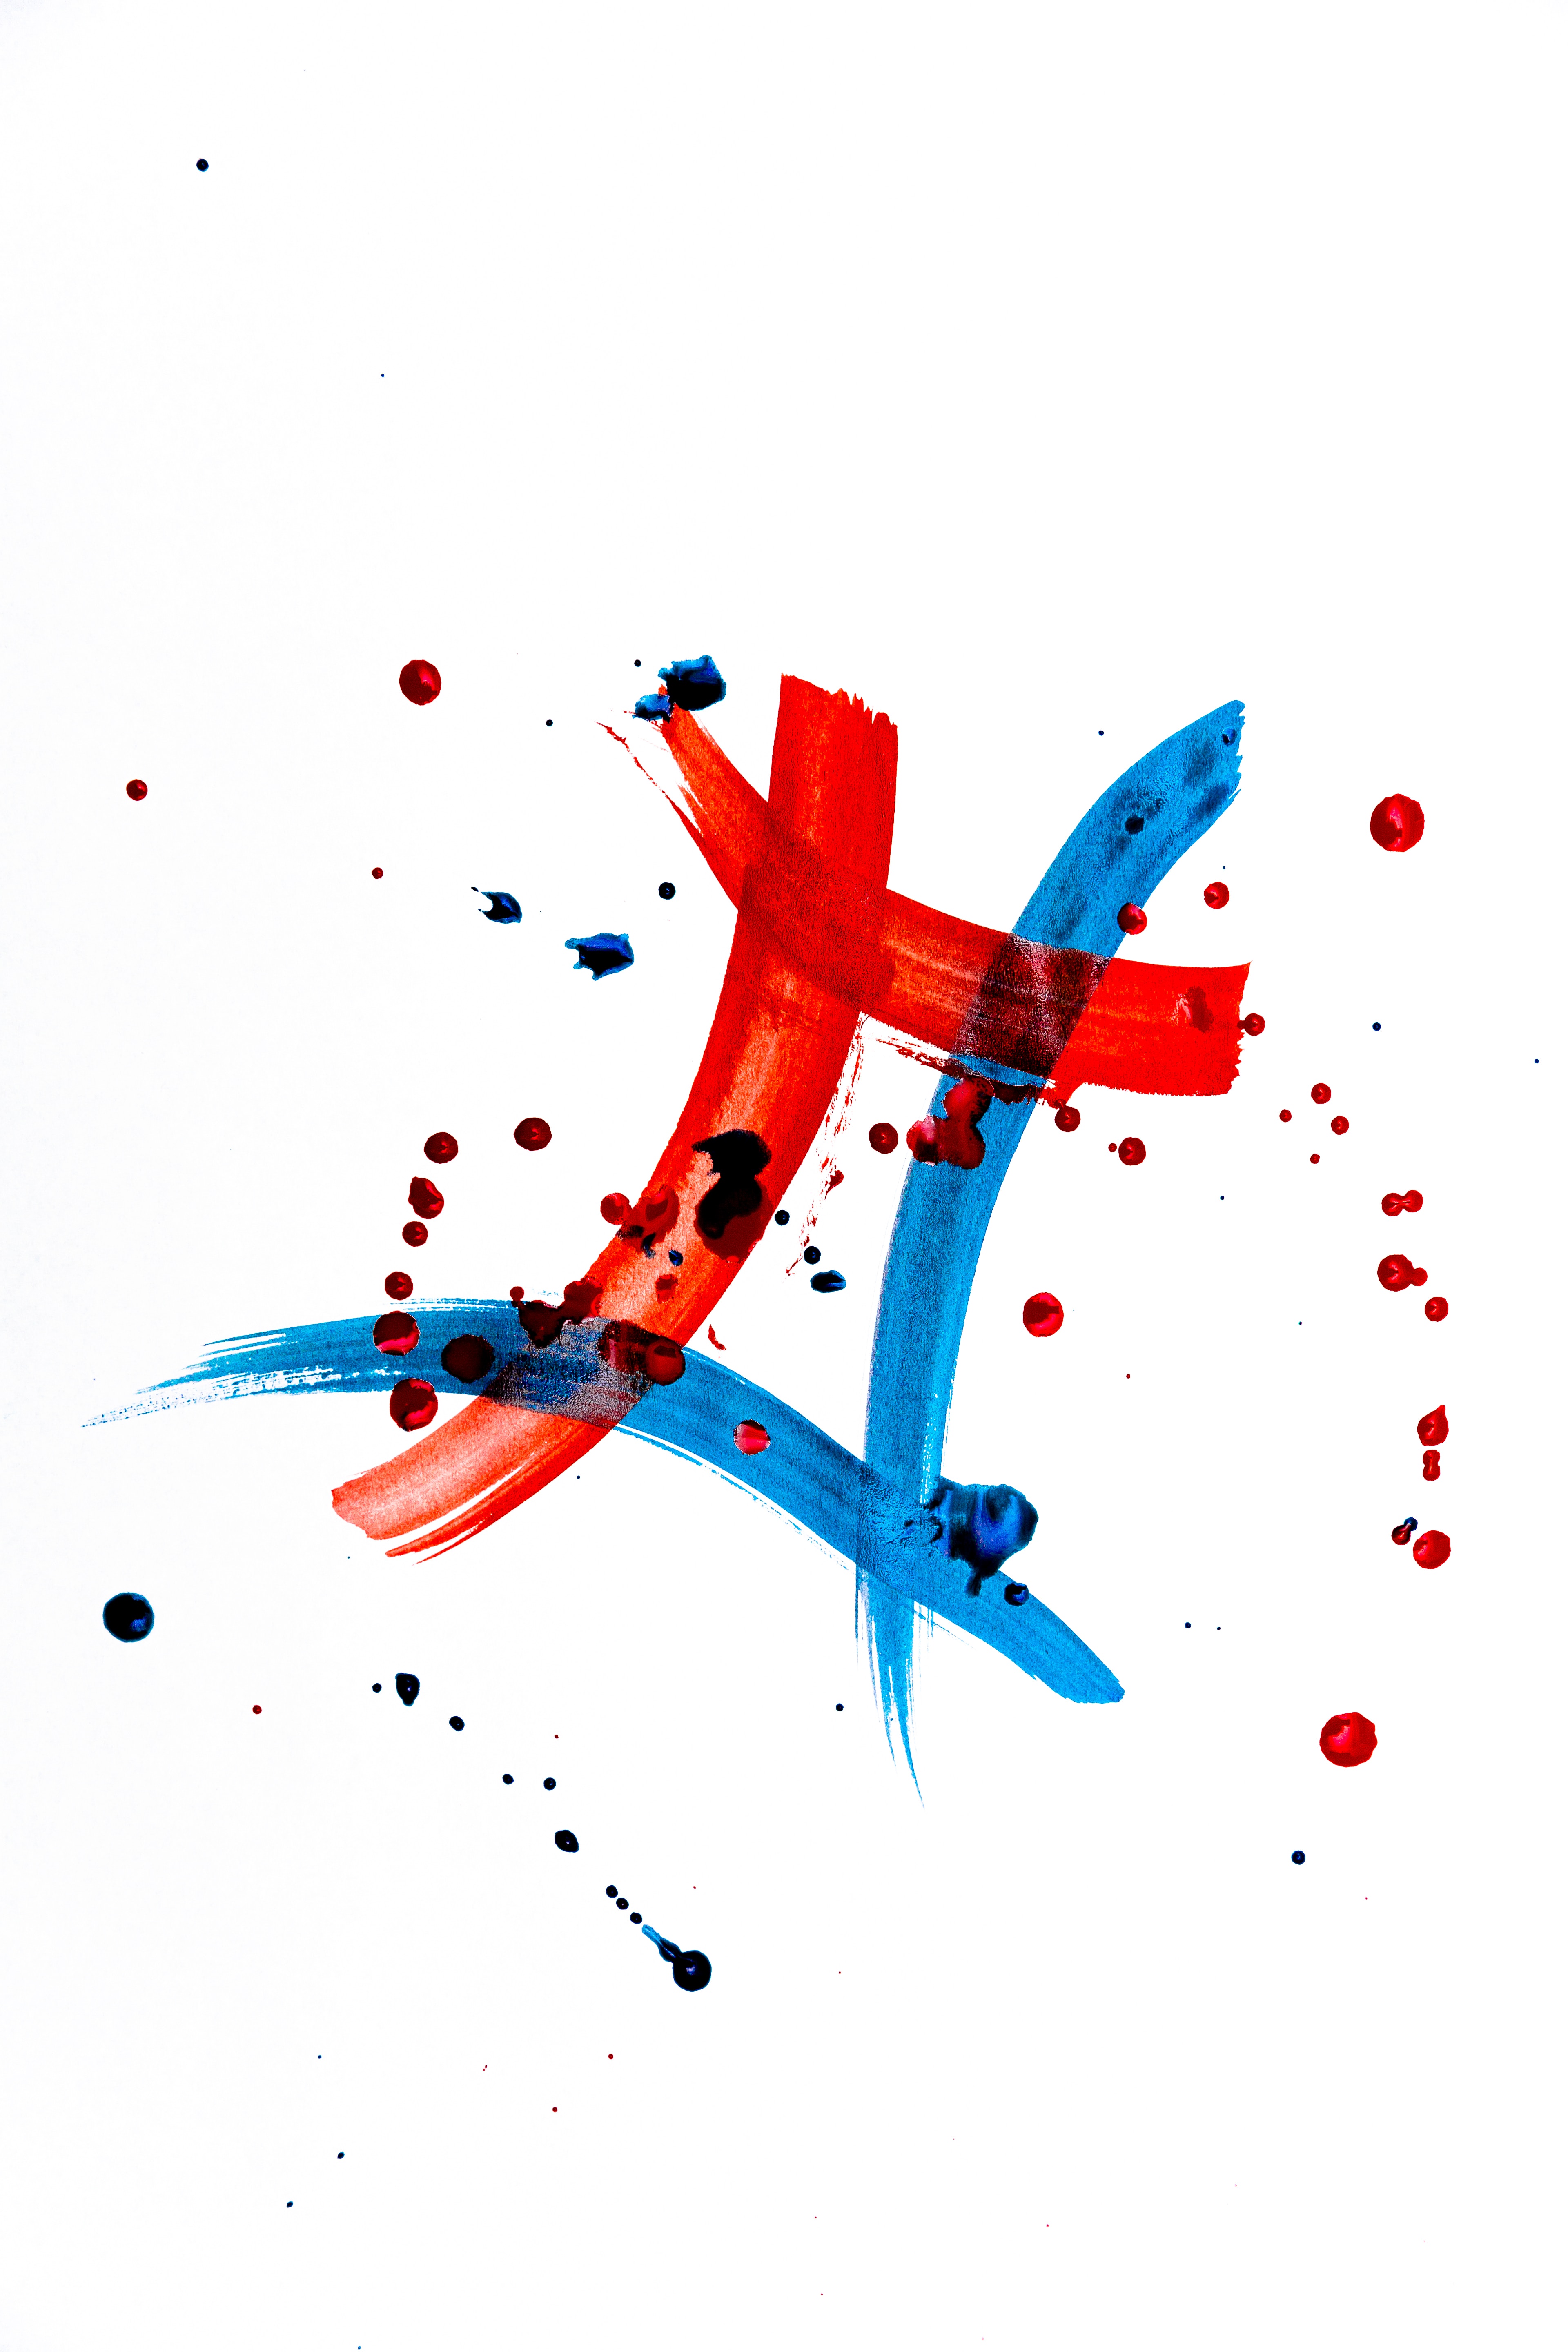 spots, lines, abstract, blue, red, stains